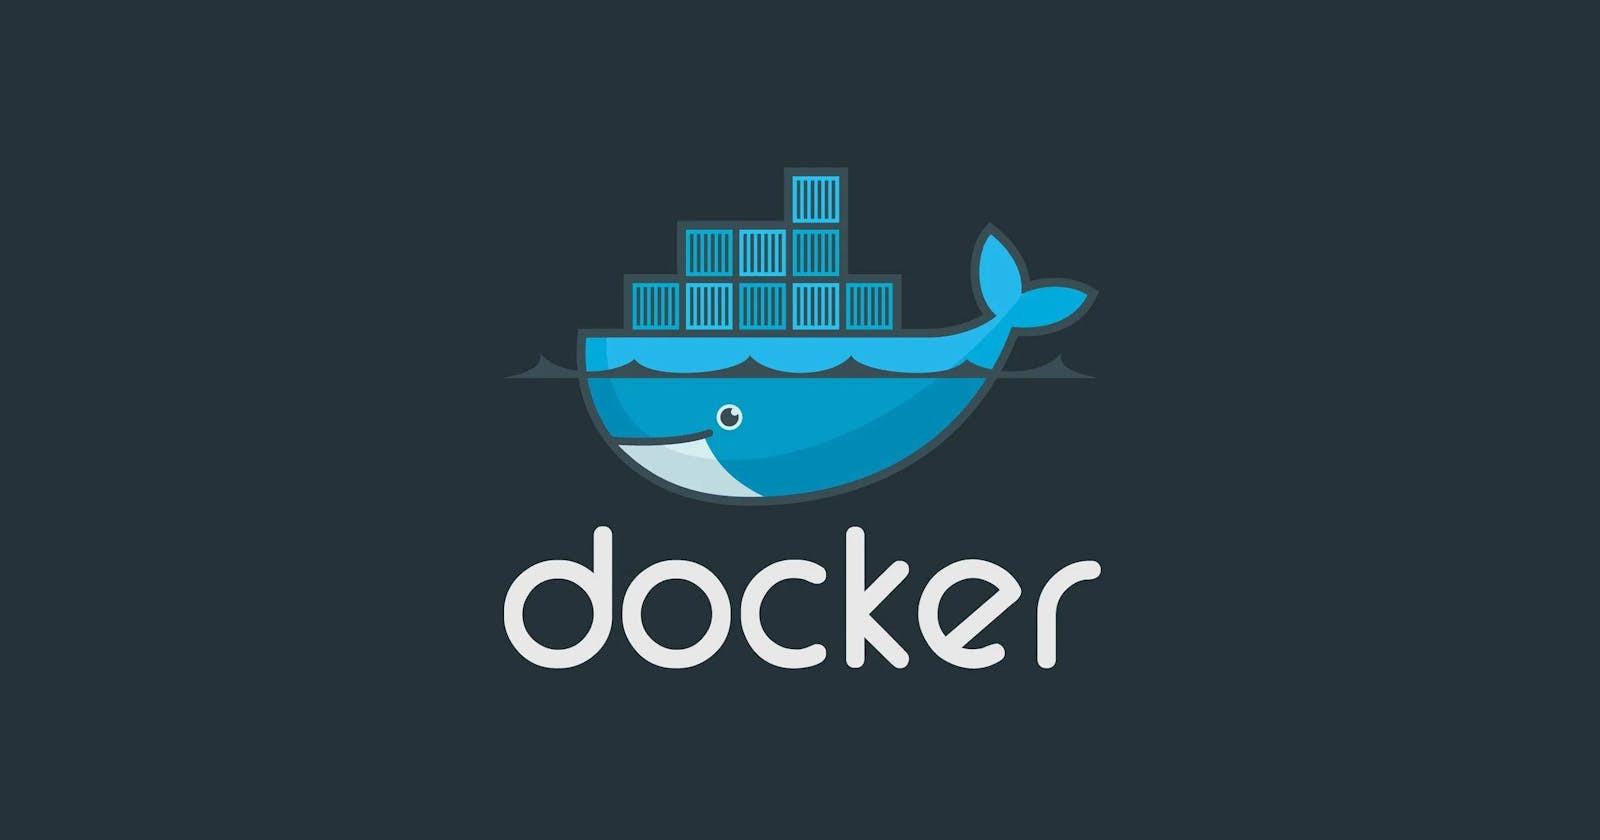 Docker in a Nutshell: A Powerful Platform for Containers